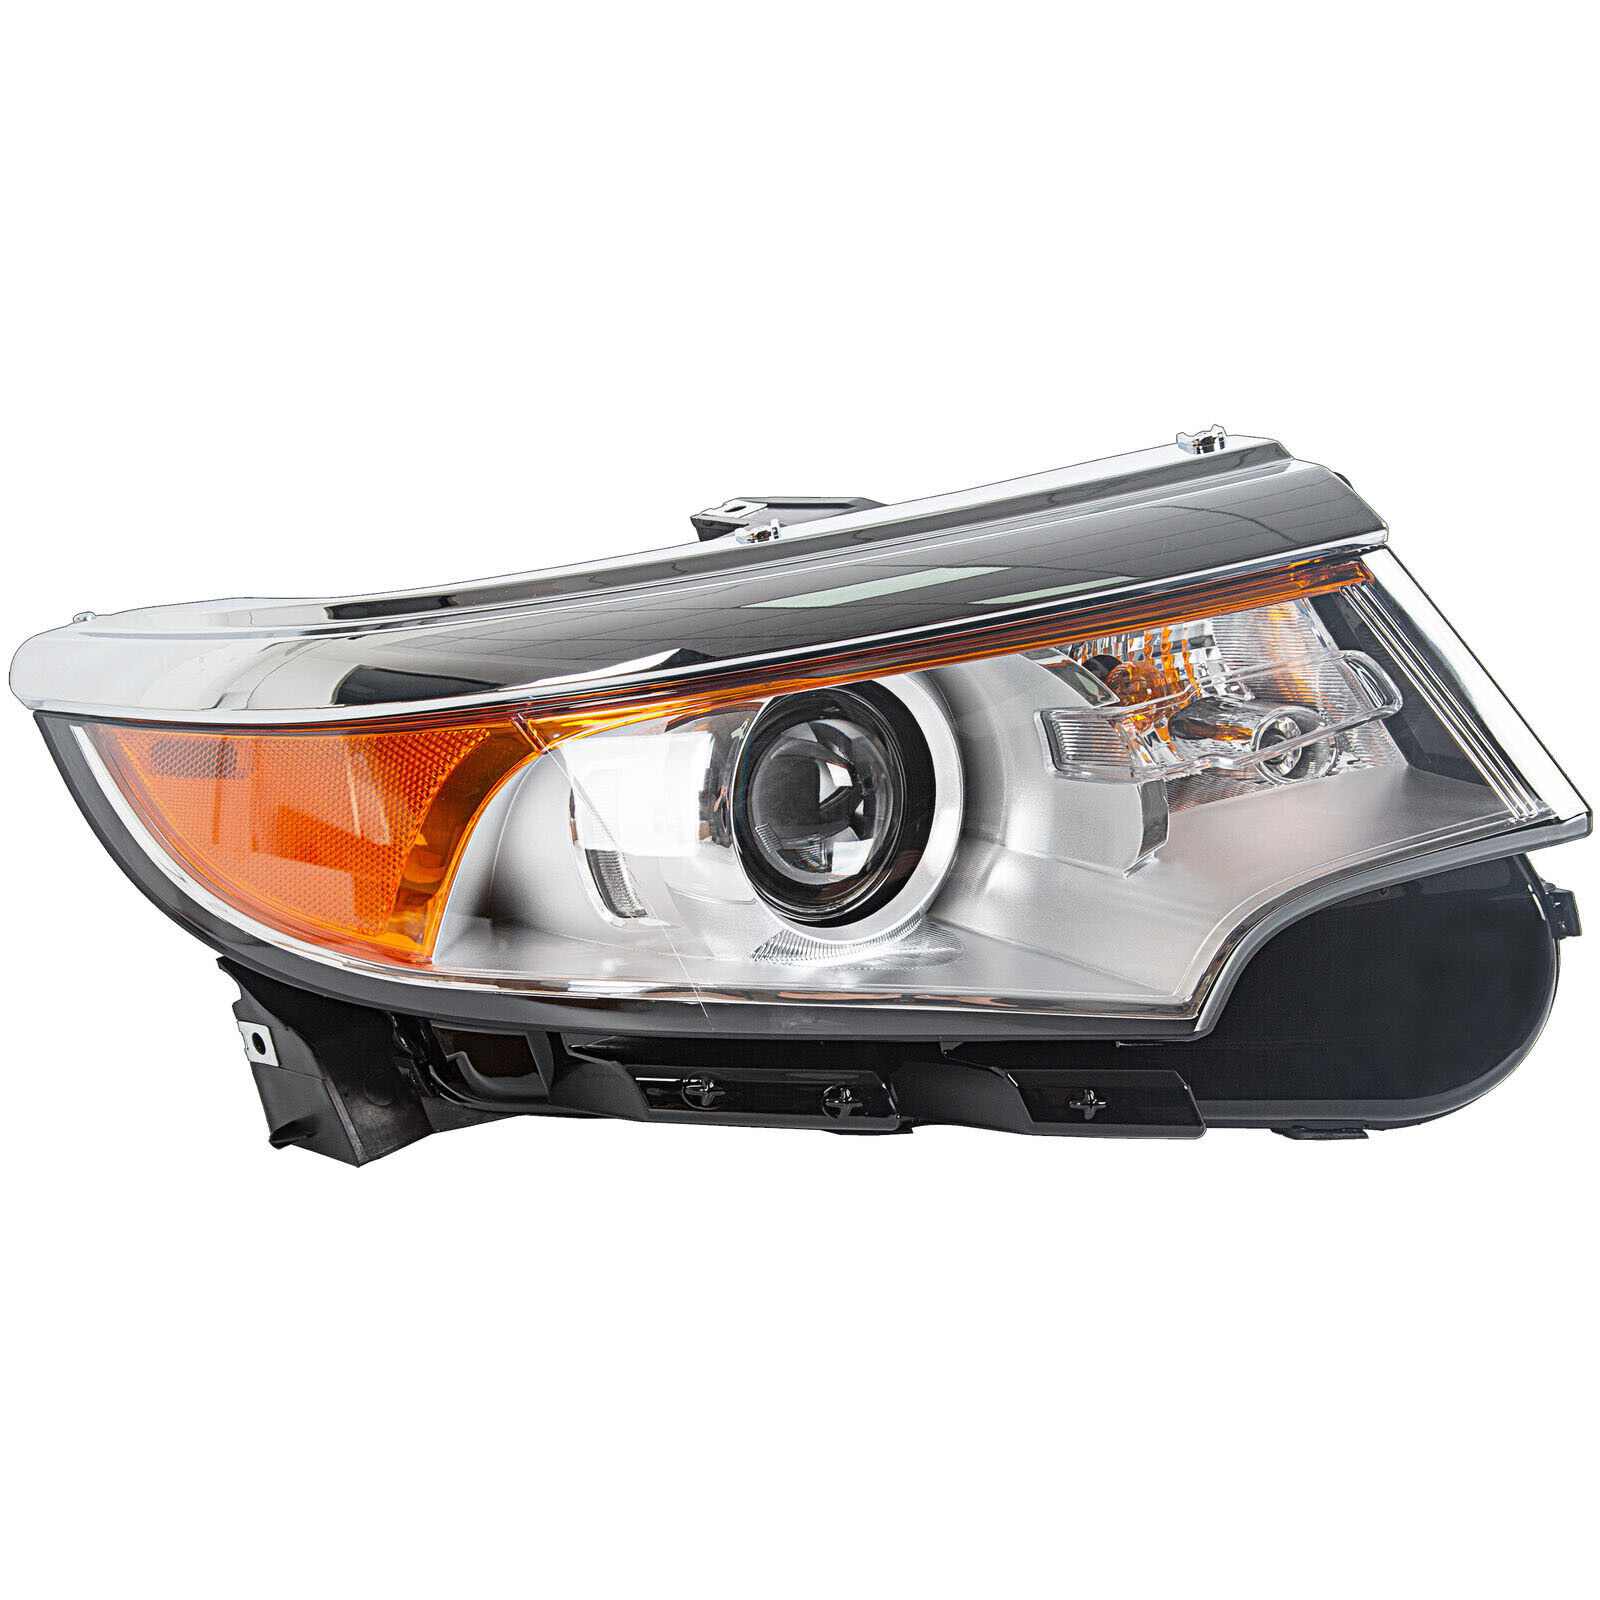 Right Side Headlight For 2011-2014 Ford Edge Type Chrome Clear Headlamps Halogen